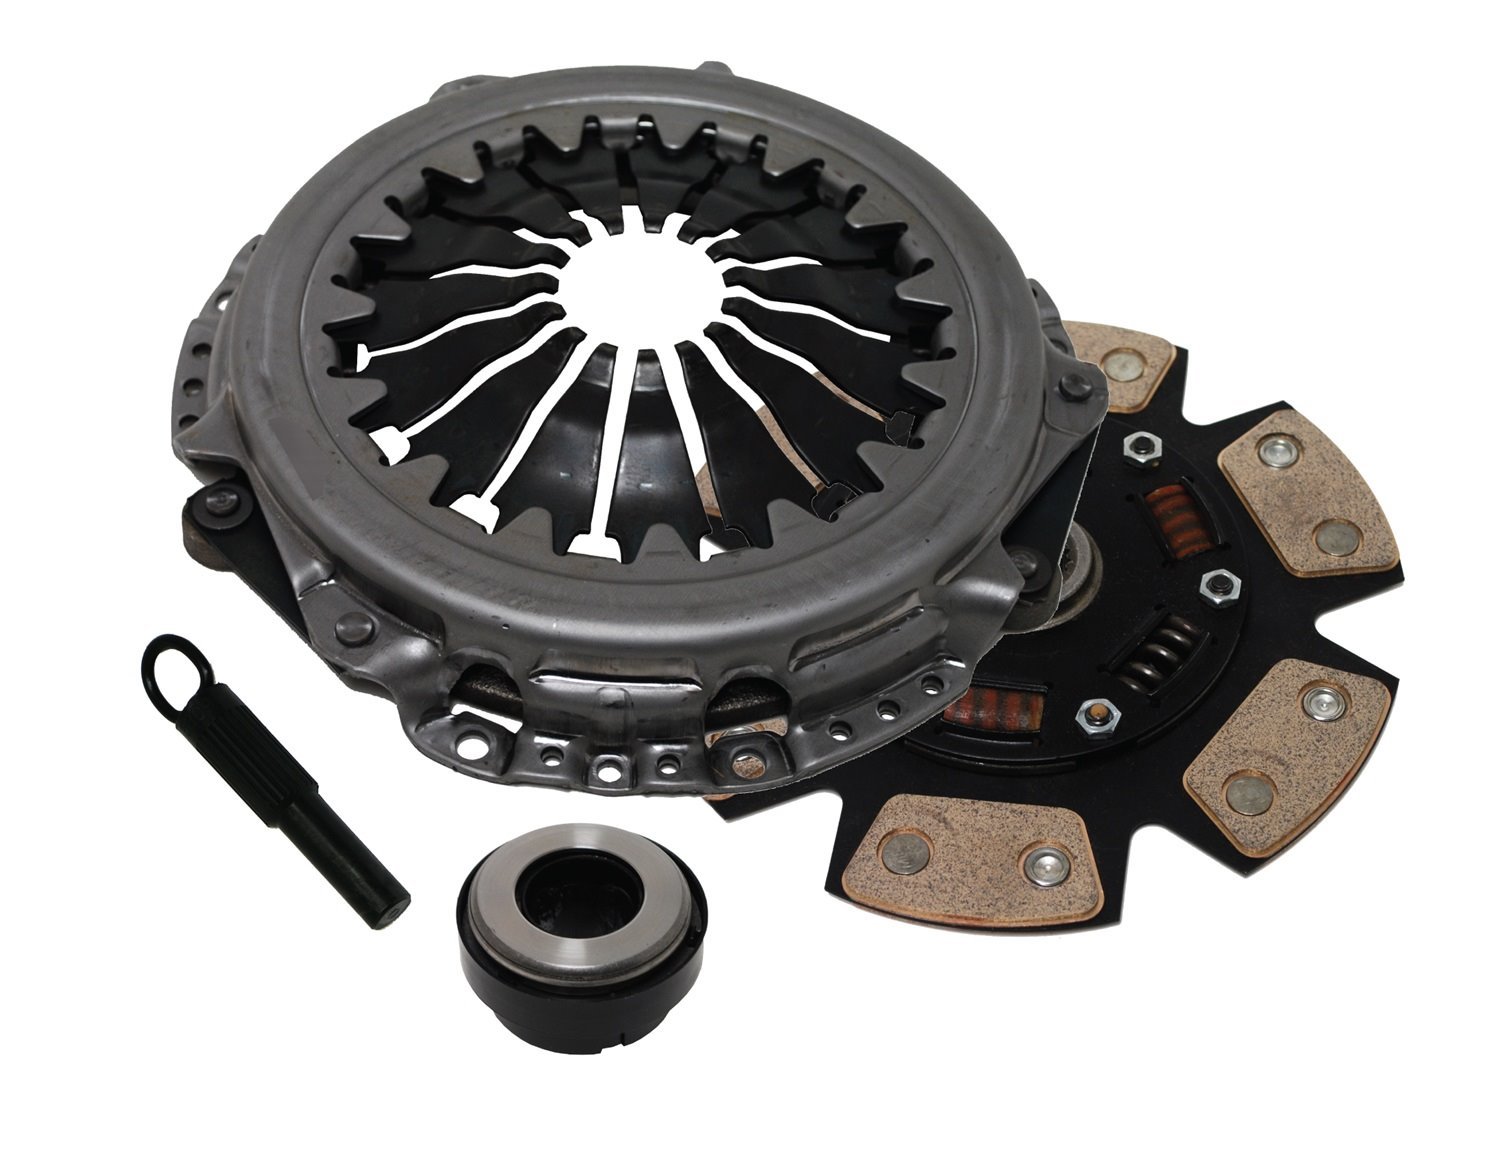 Powergrip Clutch Kit Ford Ranger: 1988-92 2.9L and 1990-92 3.0L